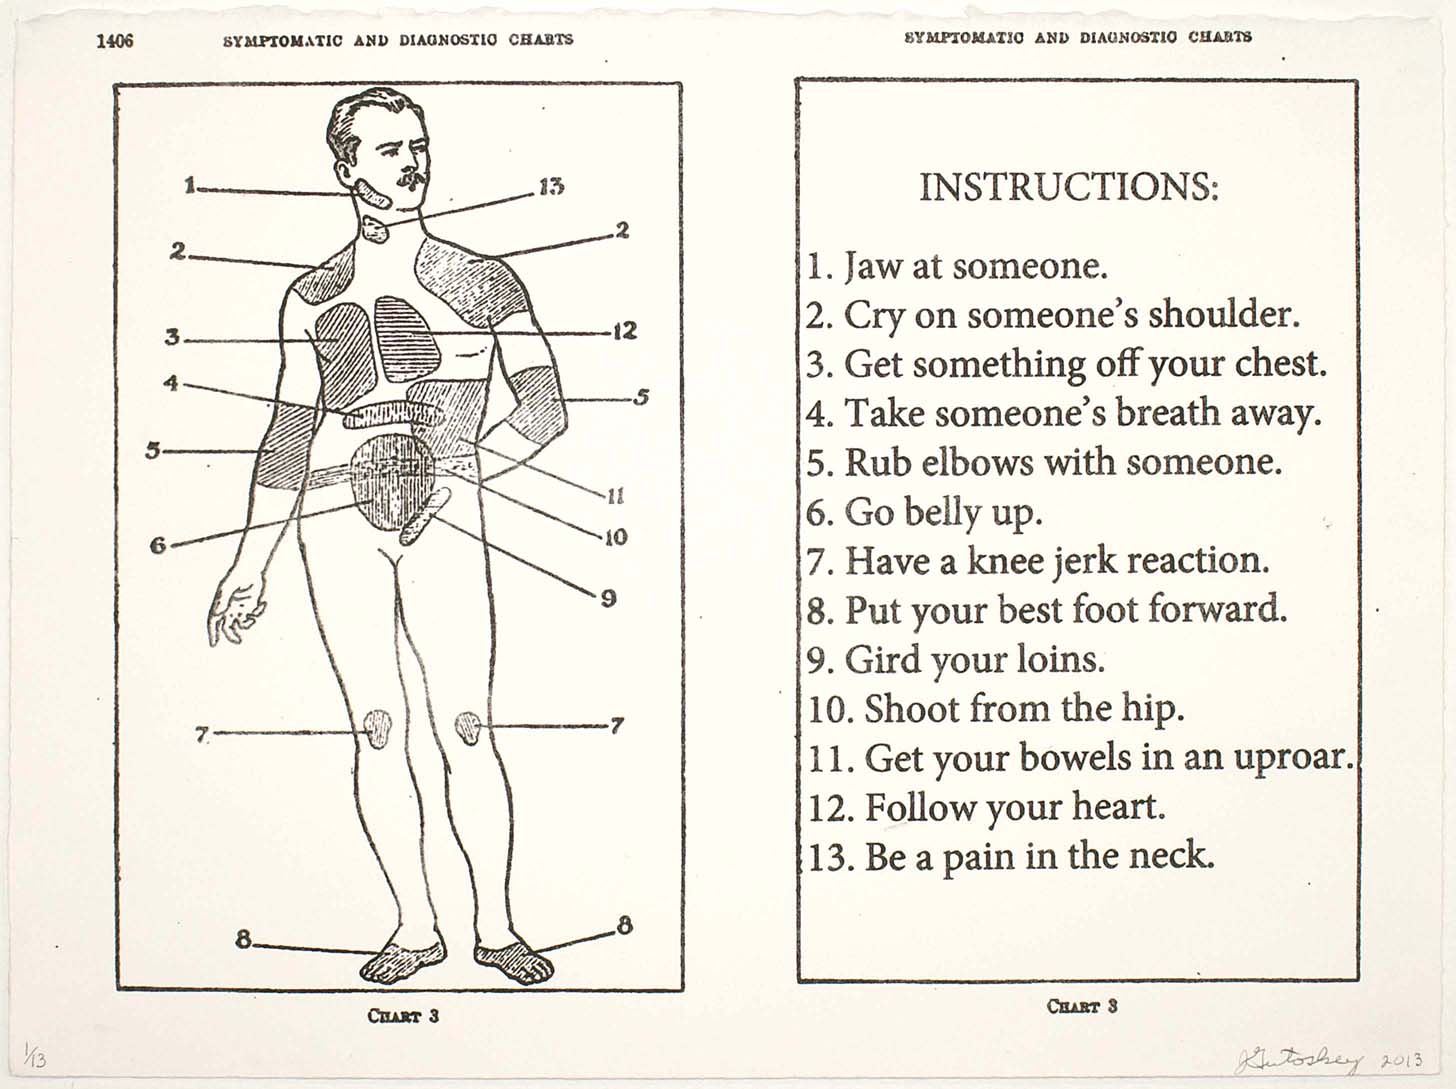     \"Instructions for Life (male)\"
    stone lithograph on Arches 88
    15\"h x 11\"w
    2013
2 editions: One edition of 7 and a second edition of 13. 

